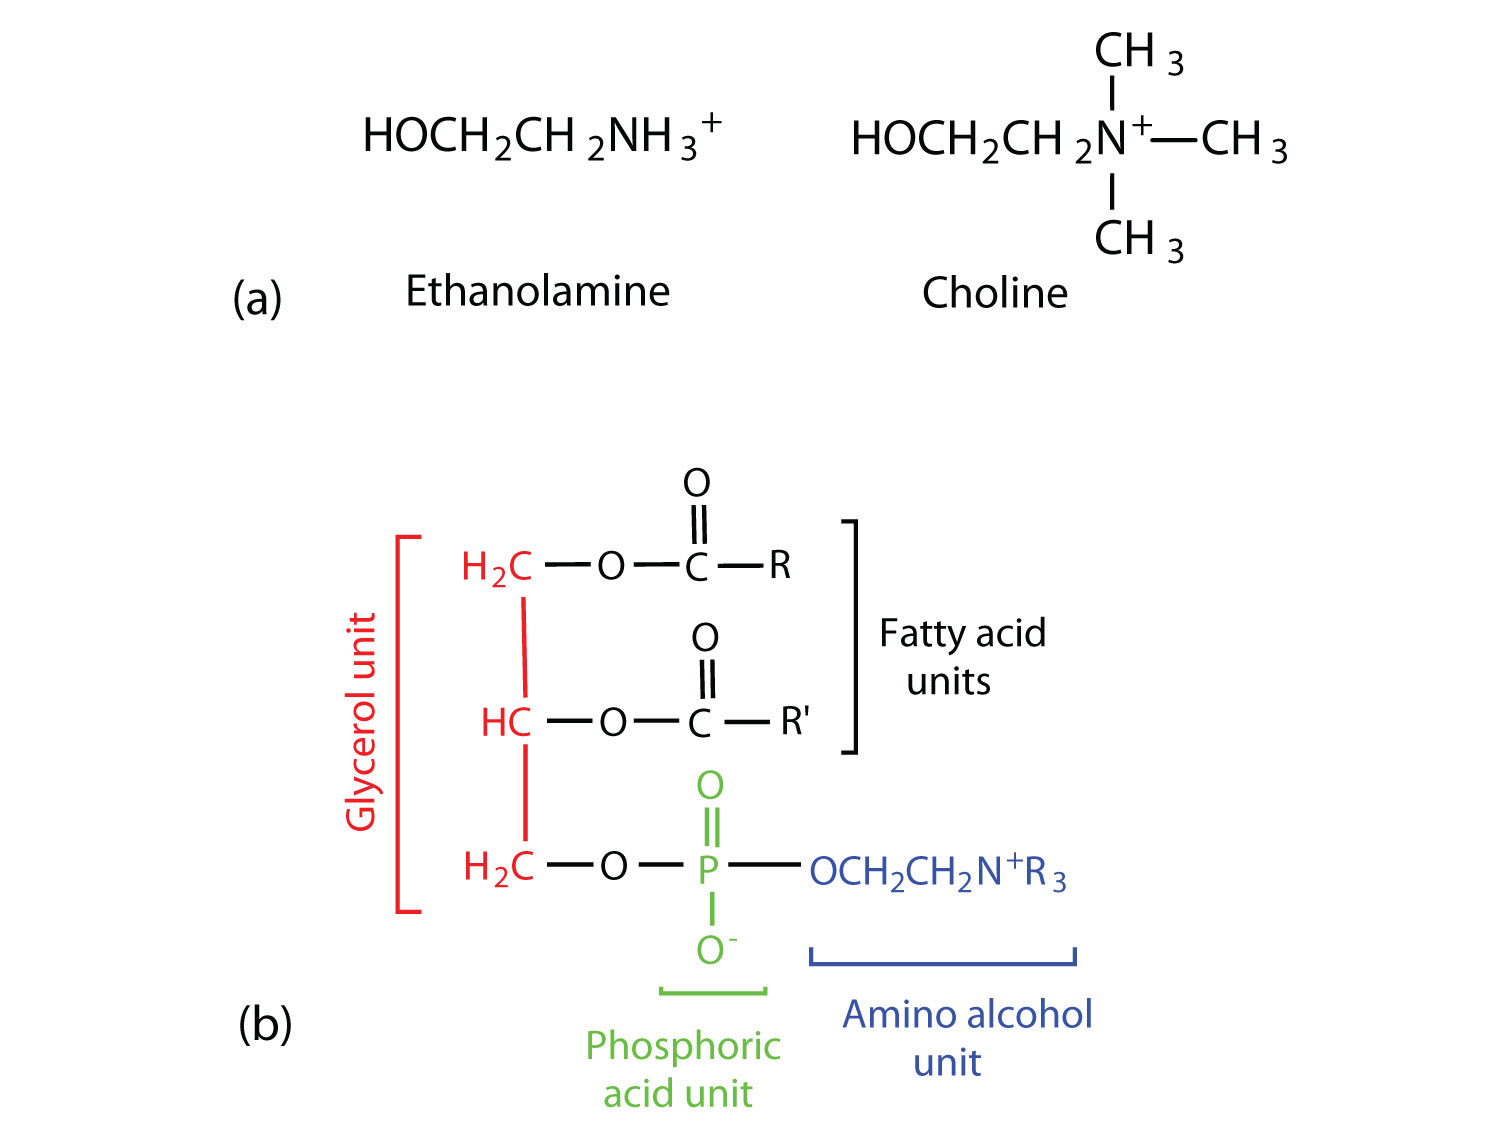 Structural formula of ethanolamine and choline are shown. The structural formula of a phosphoglyceride is shown with the glycerol unit, phosphoric unit, and amino alcohol unit highlighted in different colors. 